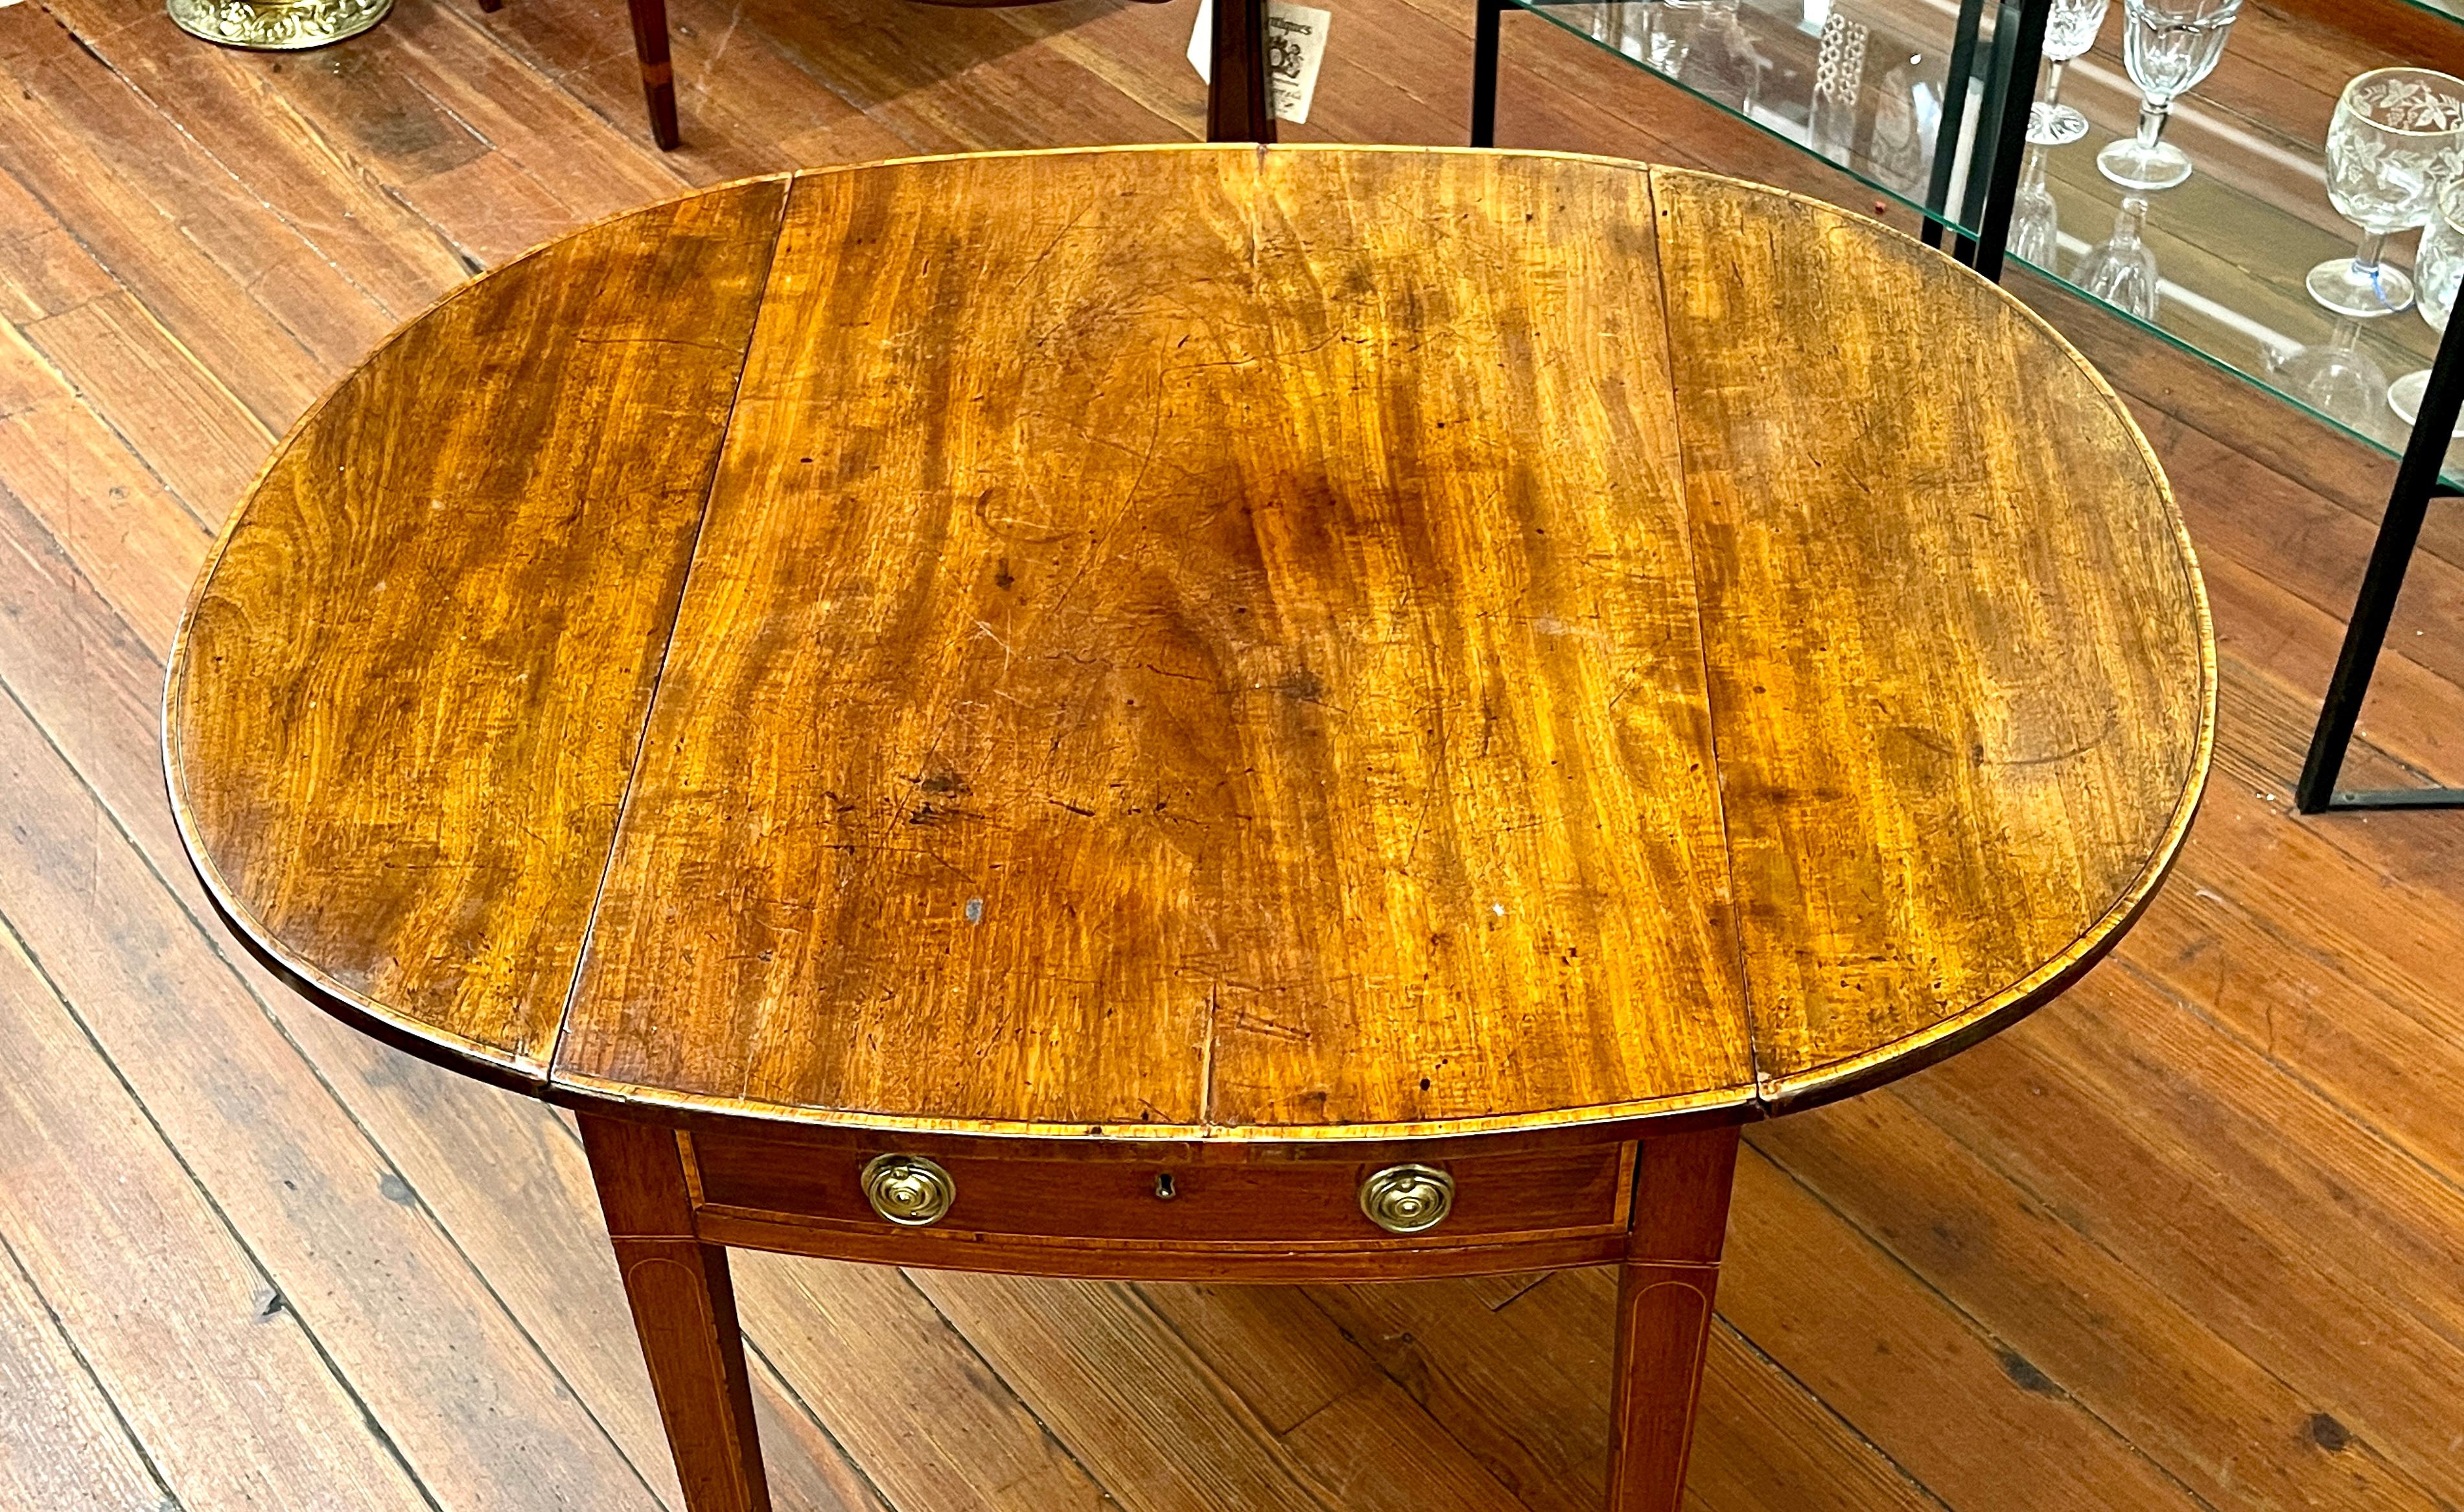 Hand-Crafted Antique English George III Inlaid Figured Mahogany Oval Drop-Leaf Pembroke Table